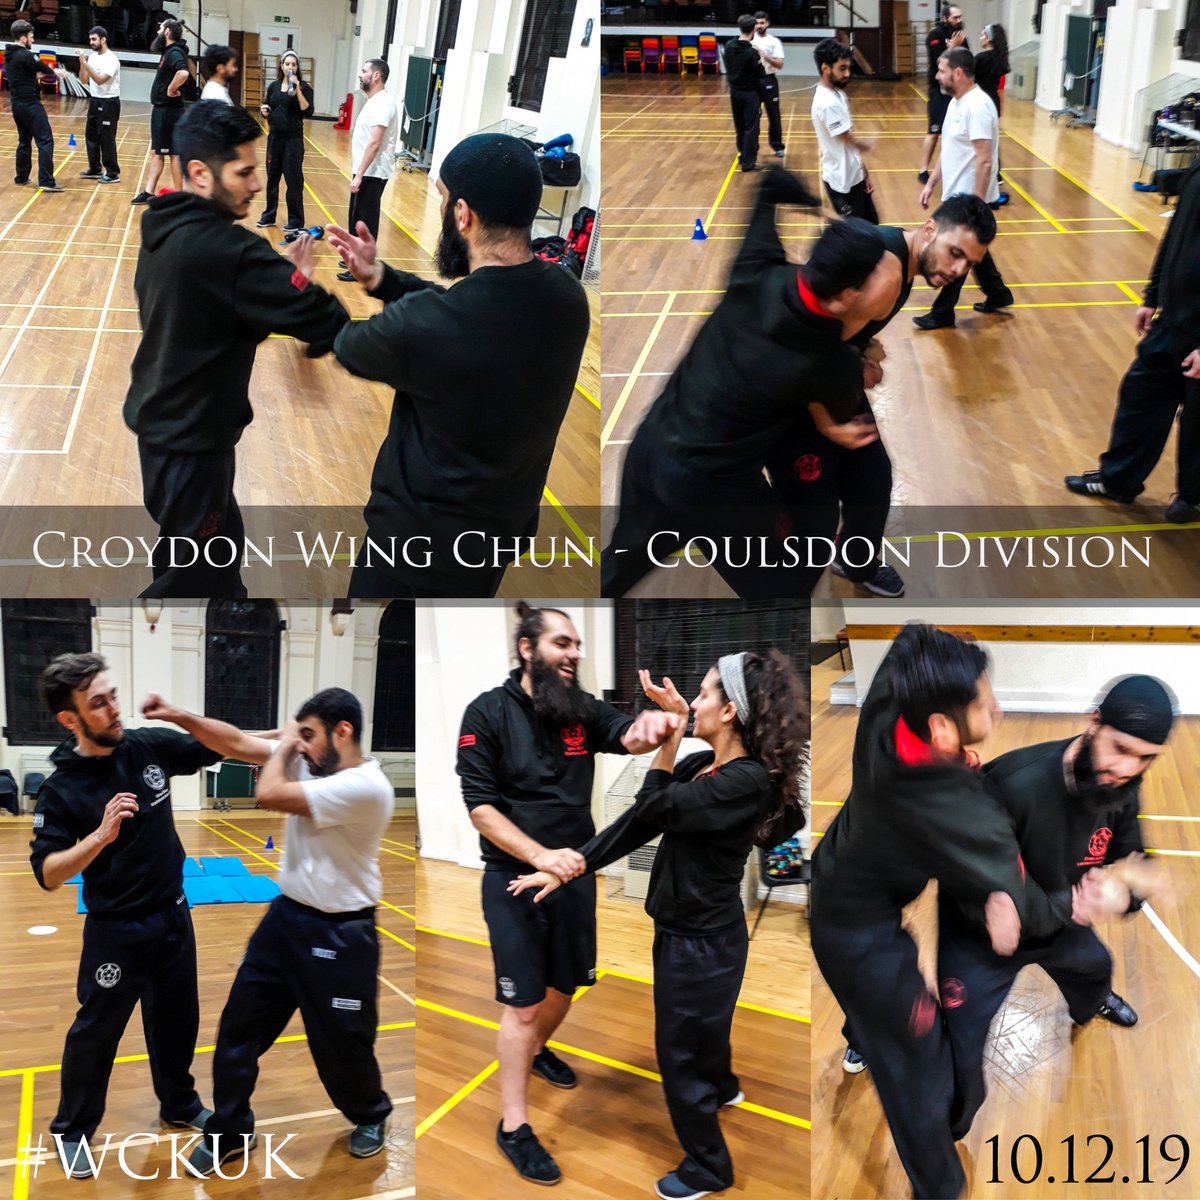 Tuesday we graded our newest student Jawad  for his 1st SG, 3rd & 4th SGs coming along nicely + advanced working 2nd & 3rd TG material ✊

#wckuk #wingchun #kungfu #croydon #coulsdon #caterham #purley #kenley #wingtsun #martialarts #selfdefense